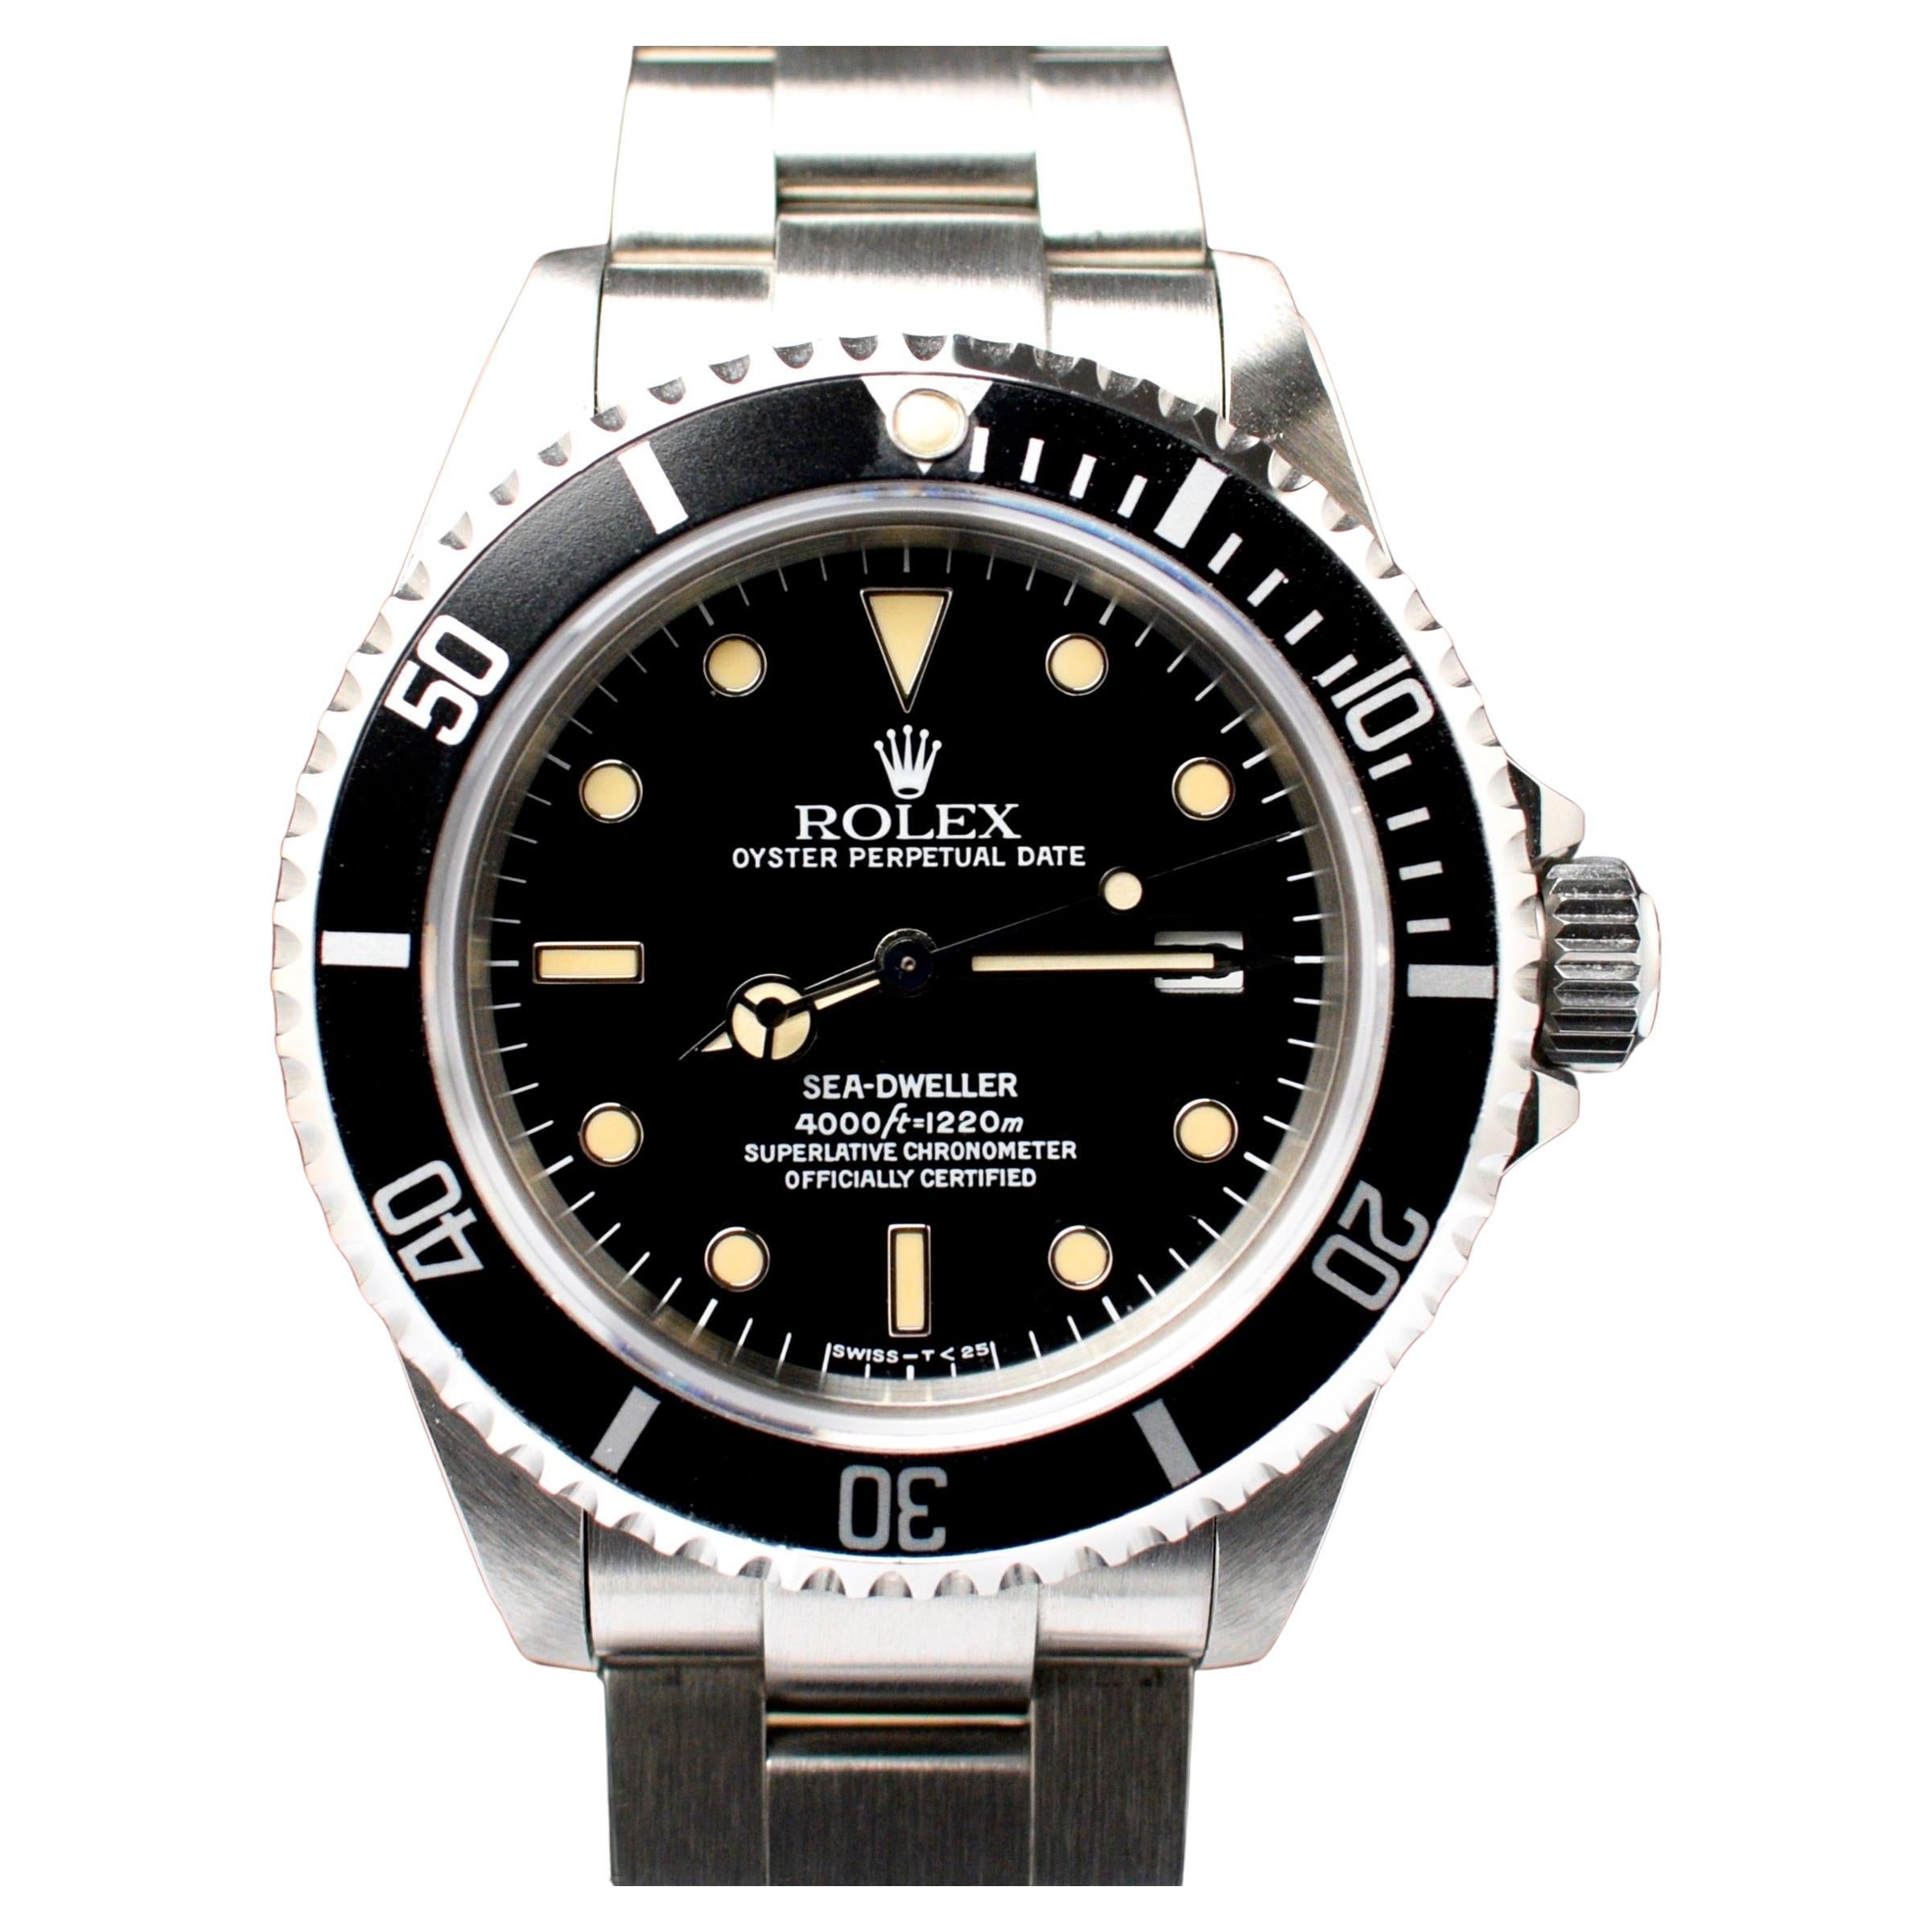 How are Rolex watches made?